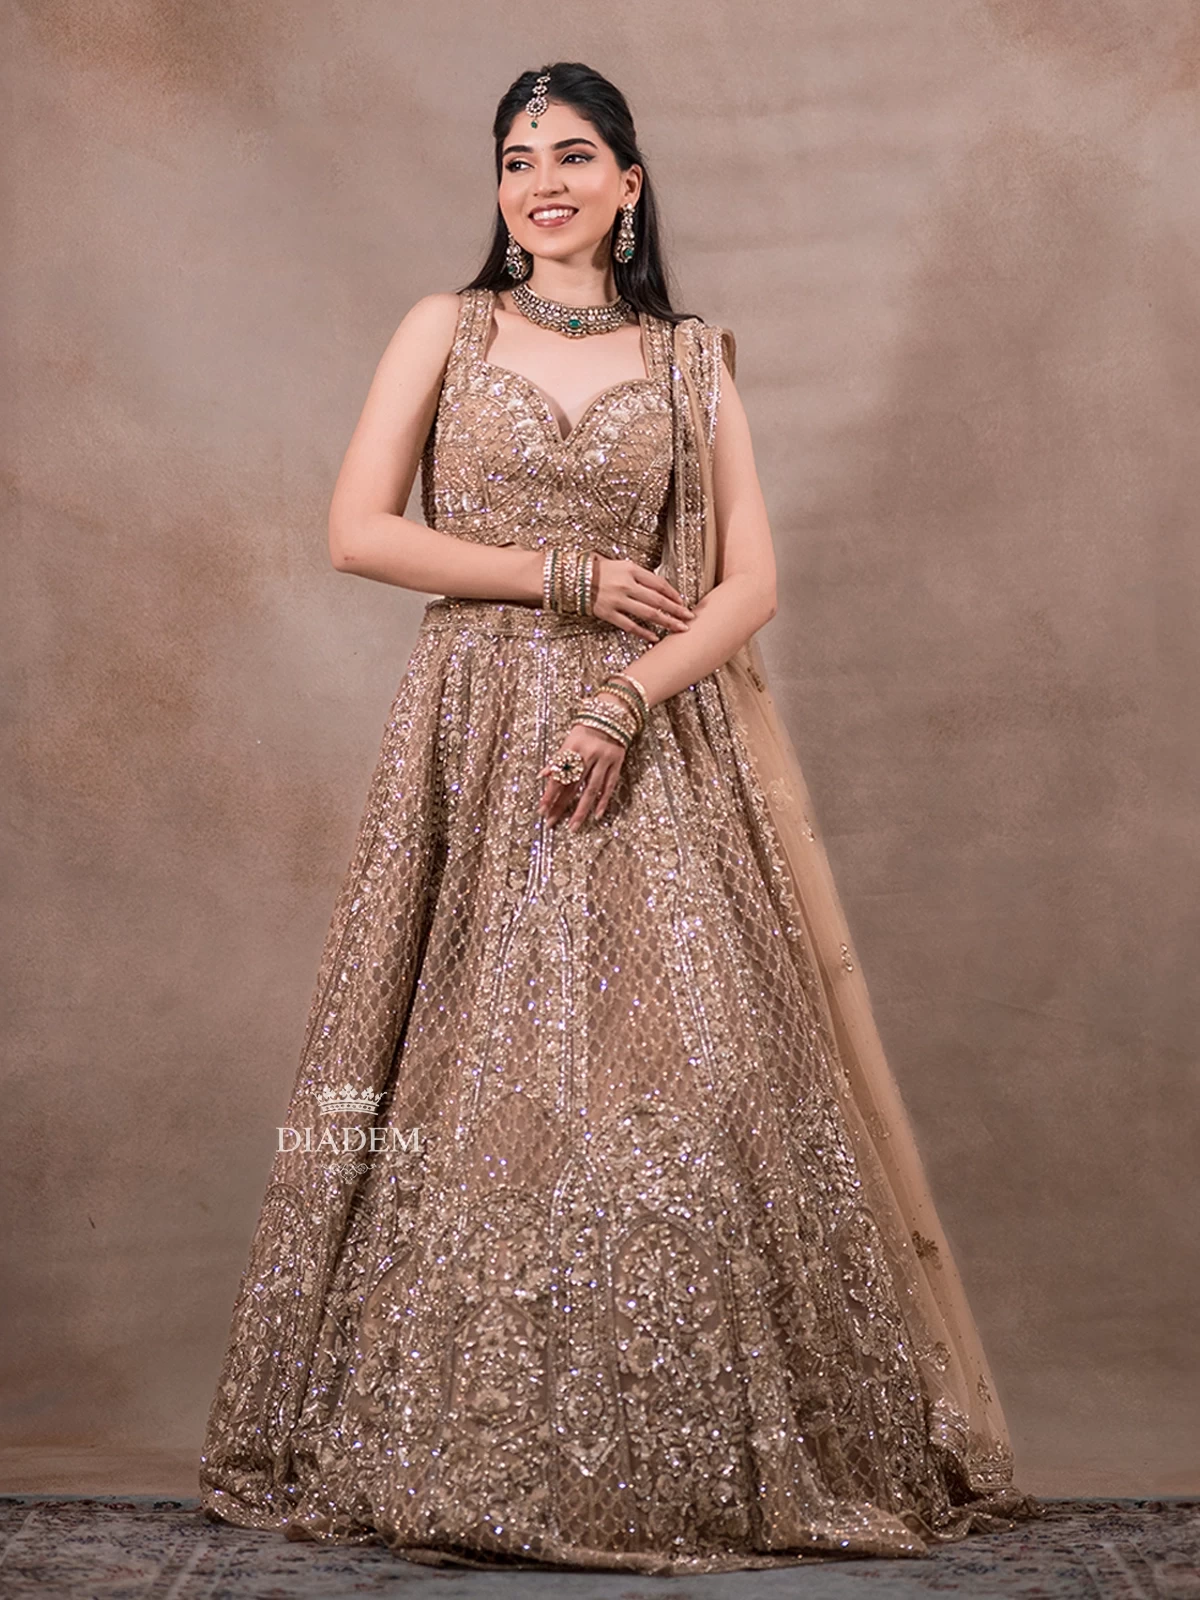 Beige Net Lehenga Embellished With Stone Work And Sequins, Paired With Dupatta